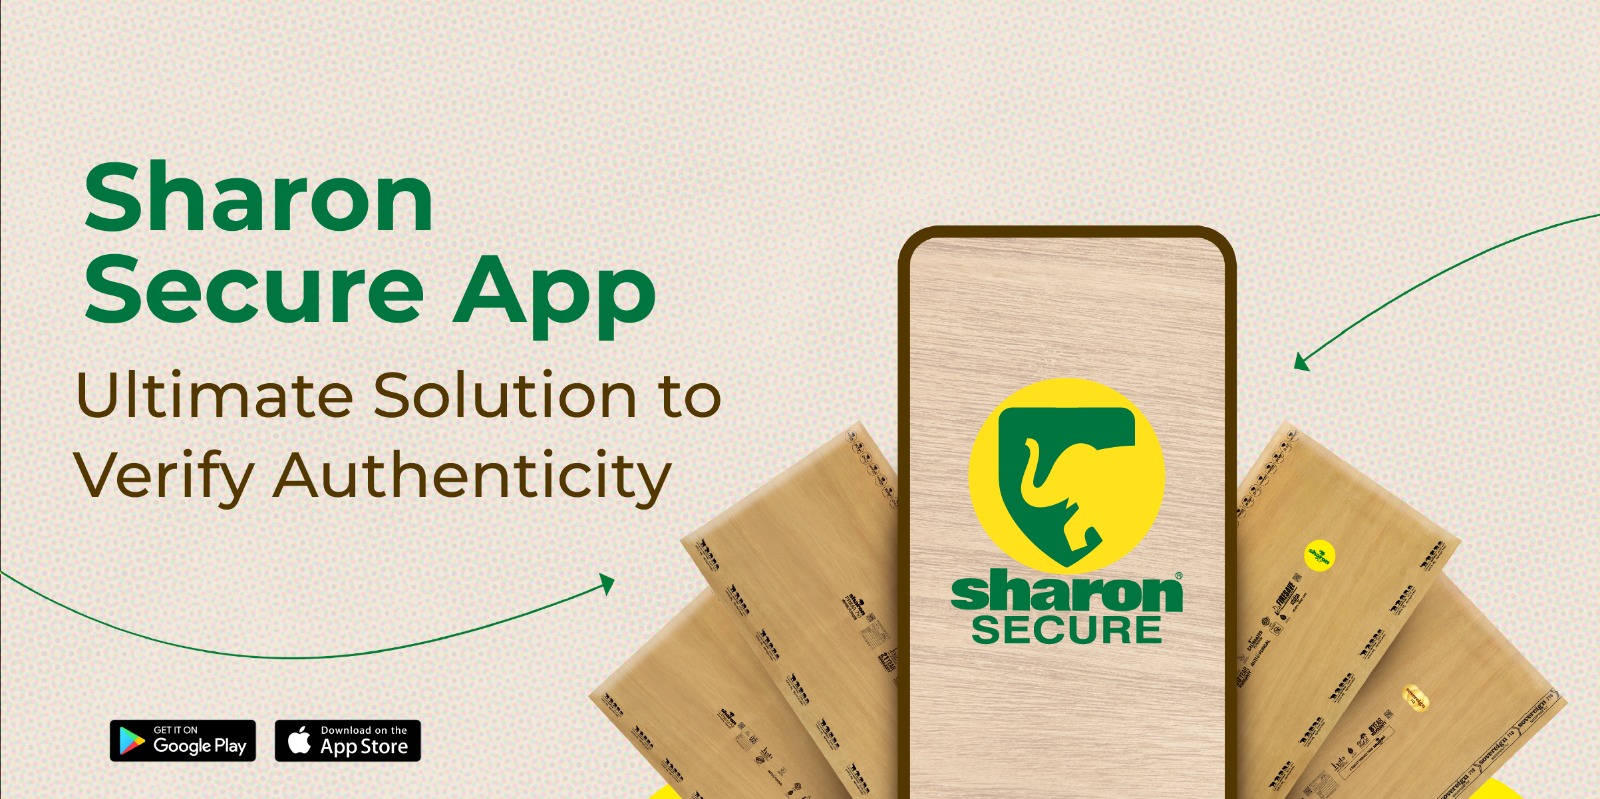 Sharon Secure App: Ultimate Solution to Verify Authenticity